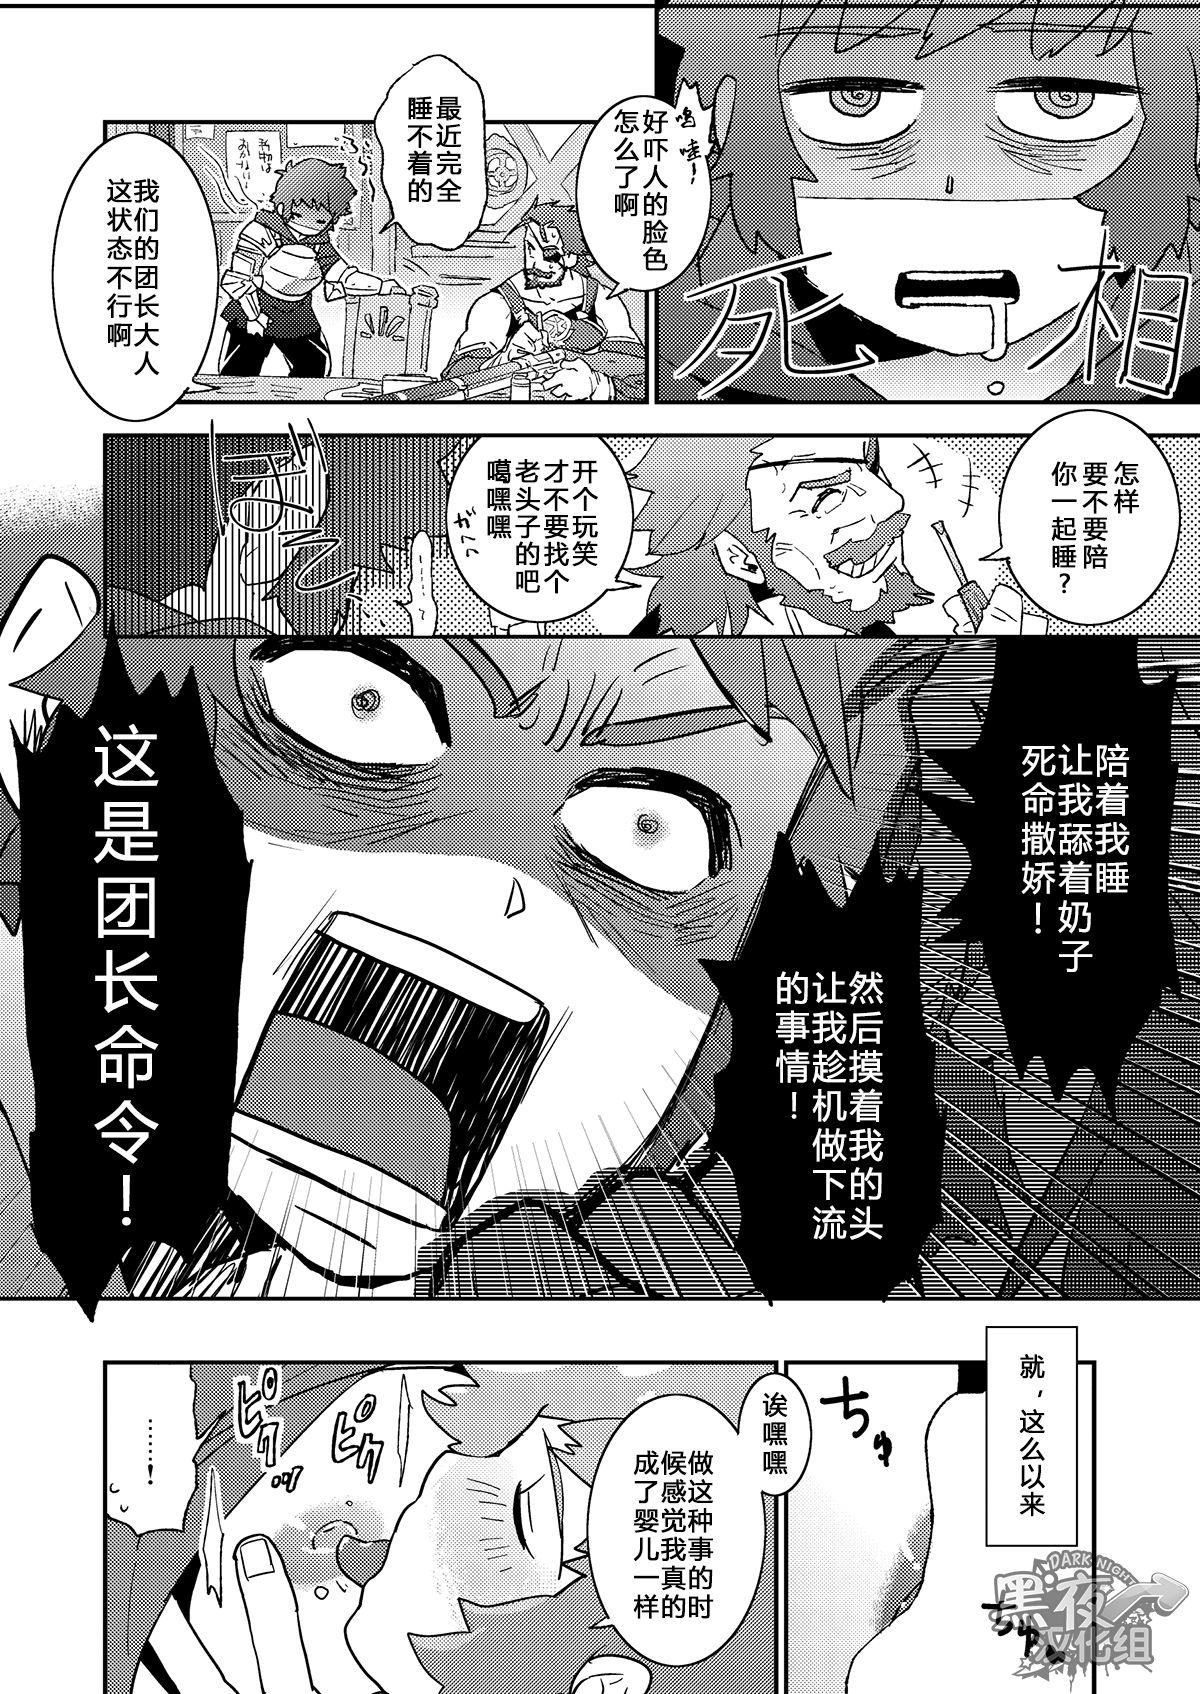 Cum Wanna be baby | 想变成婴儿 - Granblue fantasy Hairy - Page 8